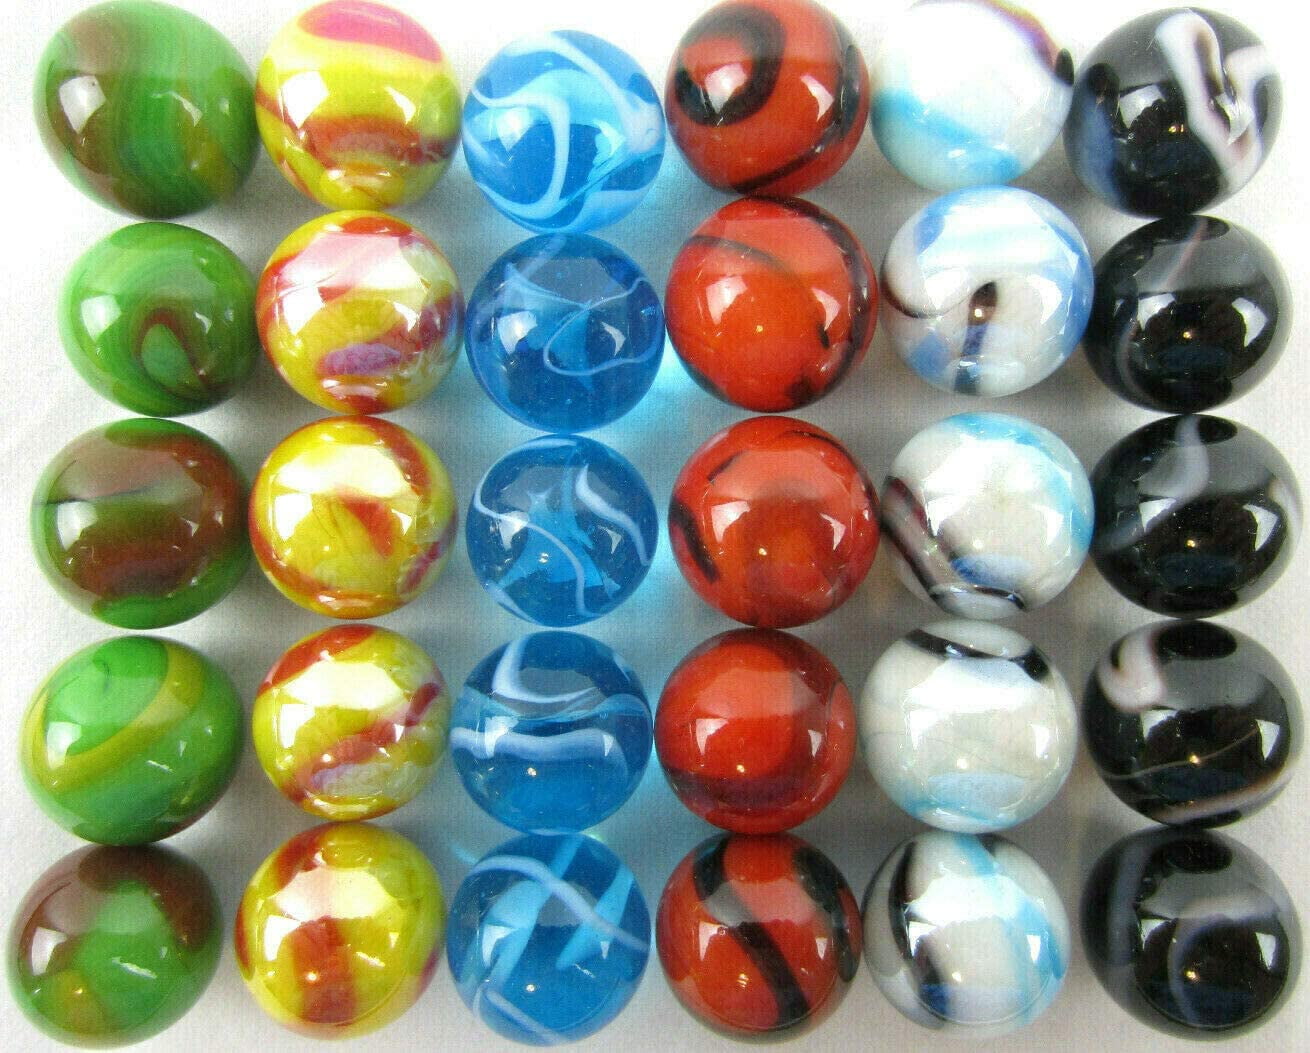 Hungry Hungry Hippos Game Replacement Marbles Balls Twenty 20 